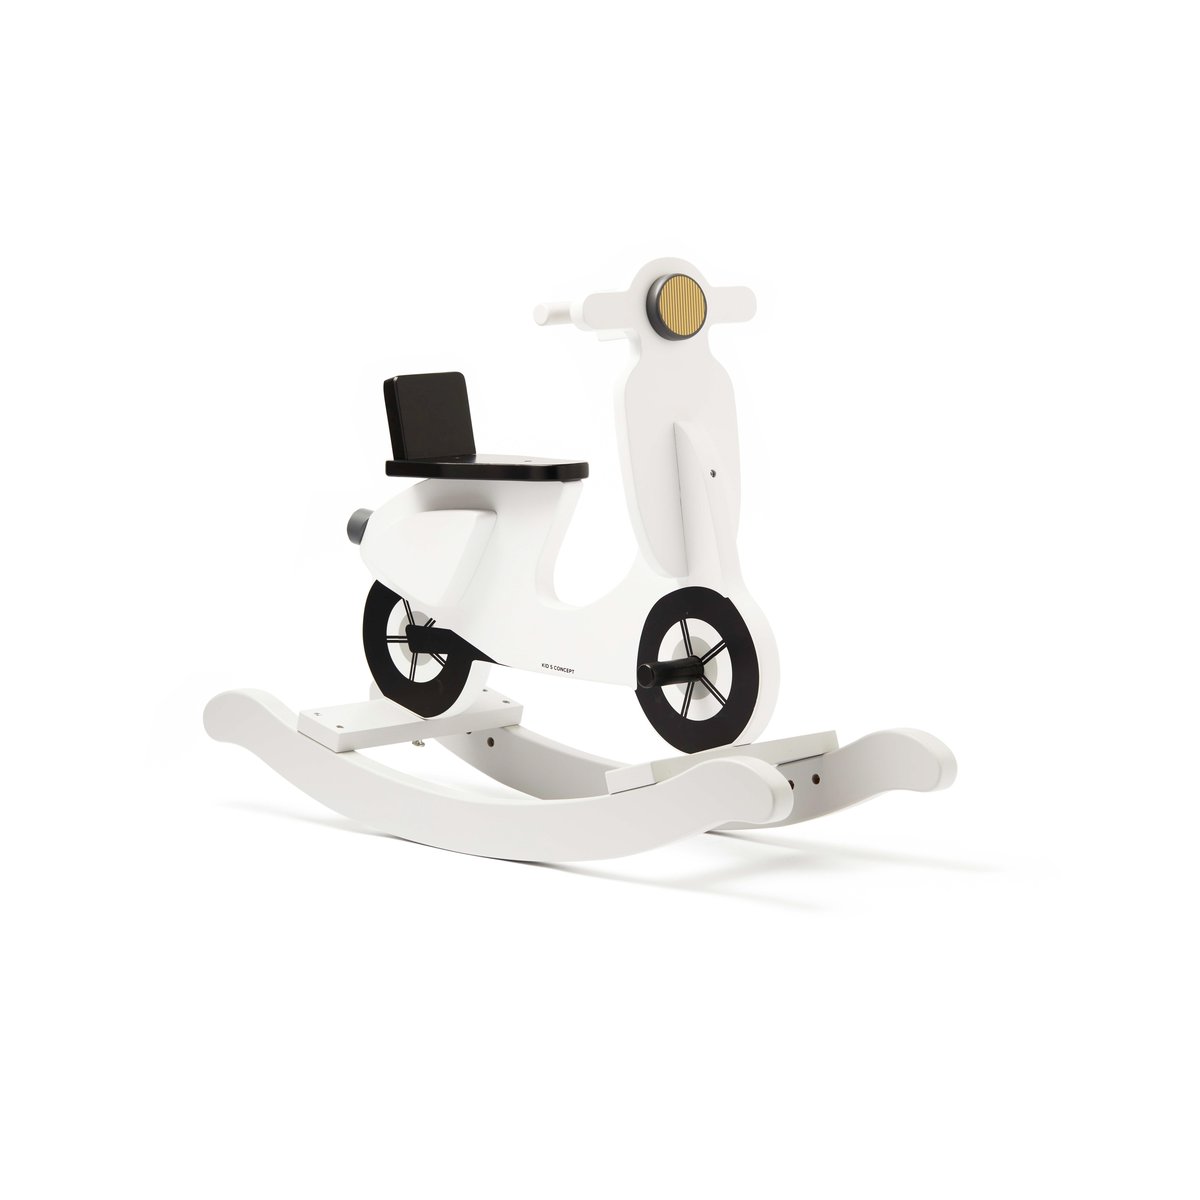 Kid's Concept Kid's Base schommelscooter Wit